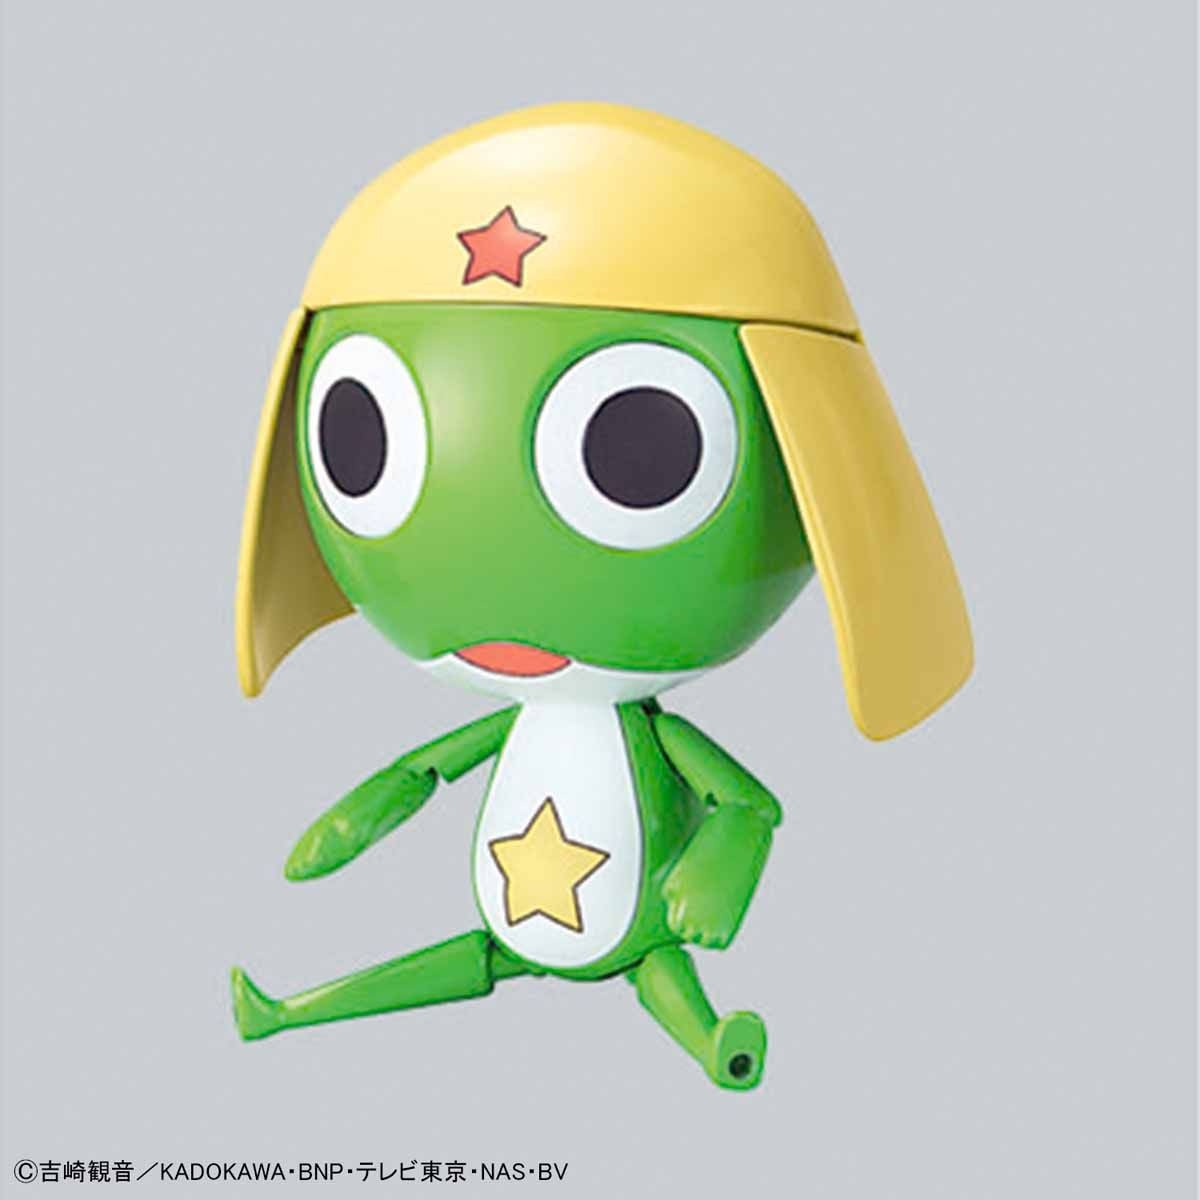 Sgt. Frog Action Figures Invade North America